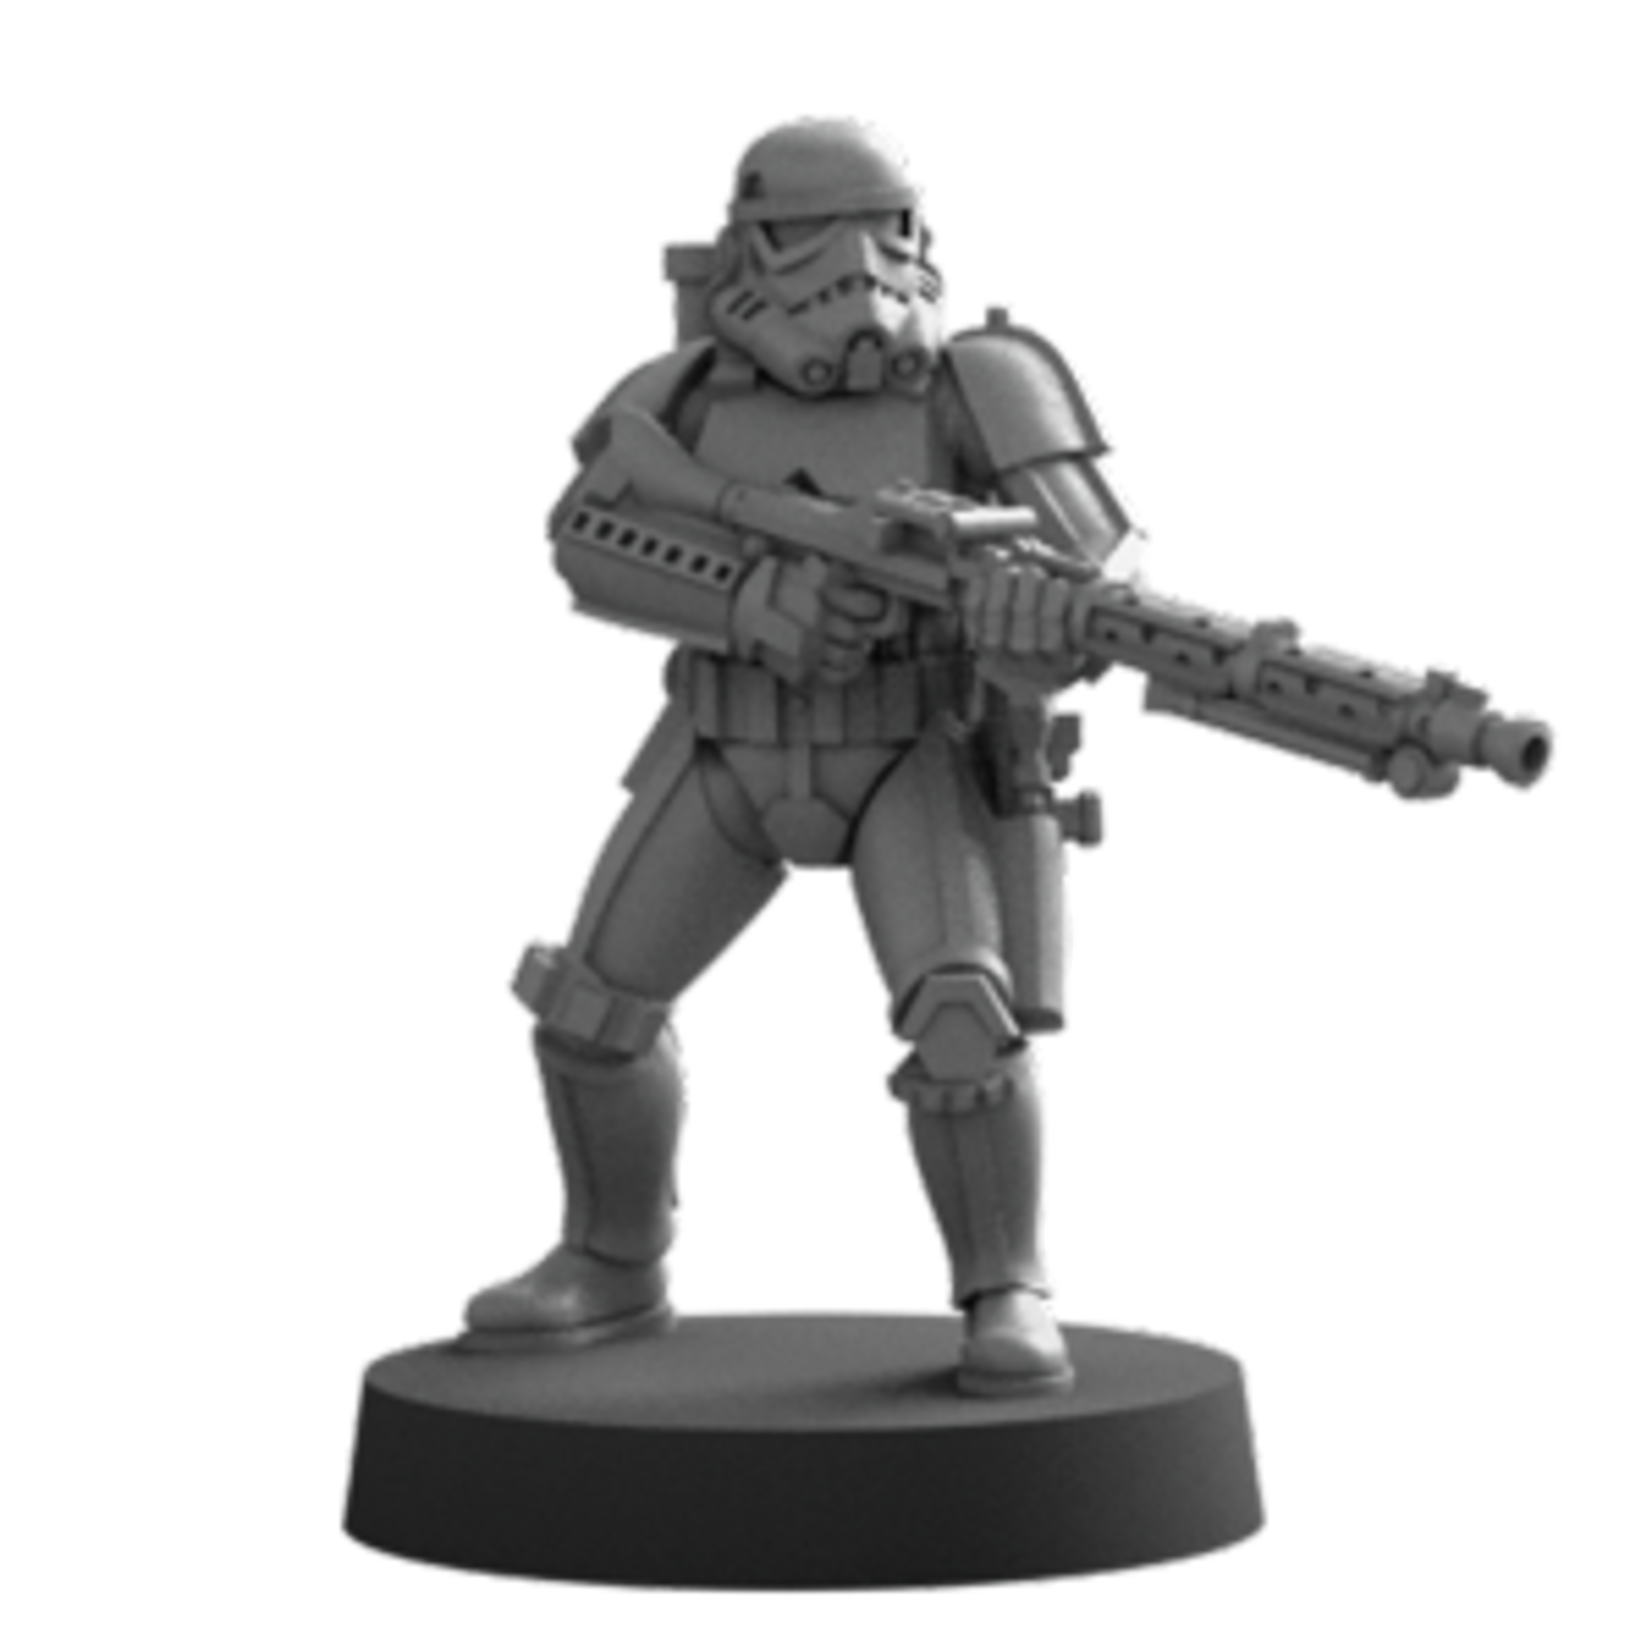 Atomic Mass Games Star Wars Legion: Stormtroopers Unit Expansion